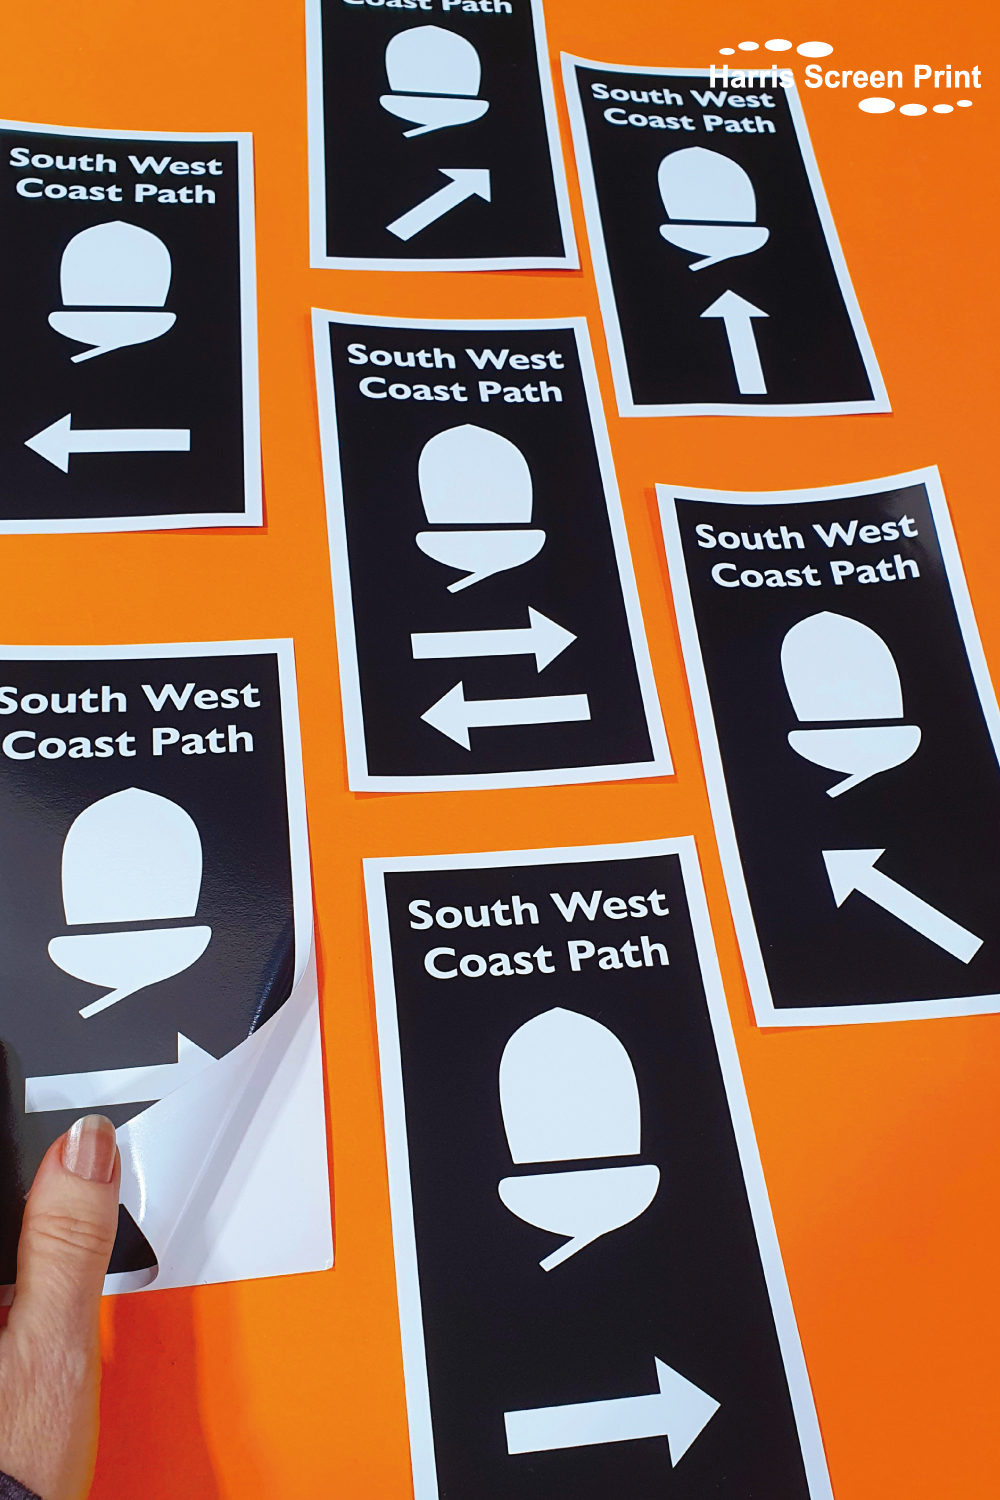 Waterproof Stickers printed for South Coast West Path